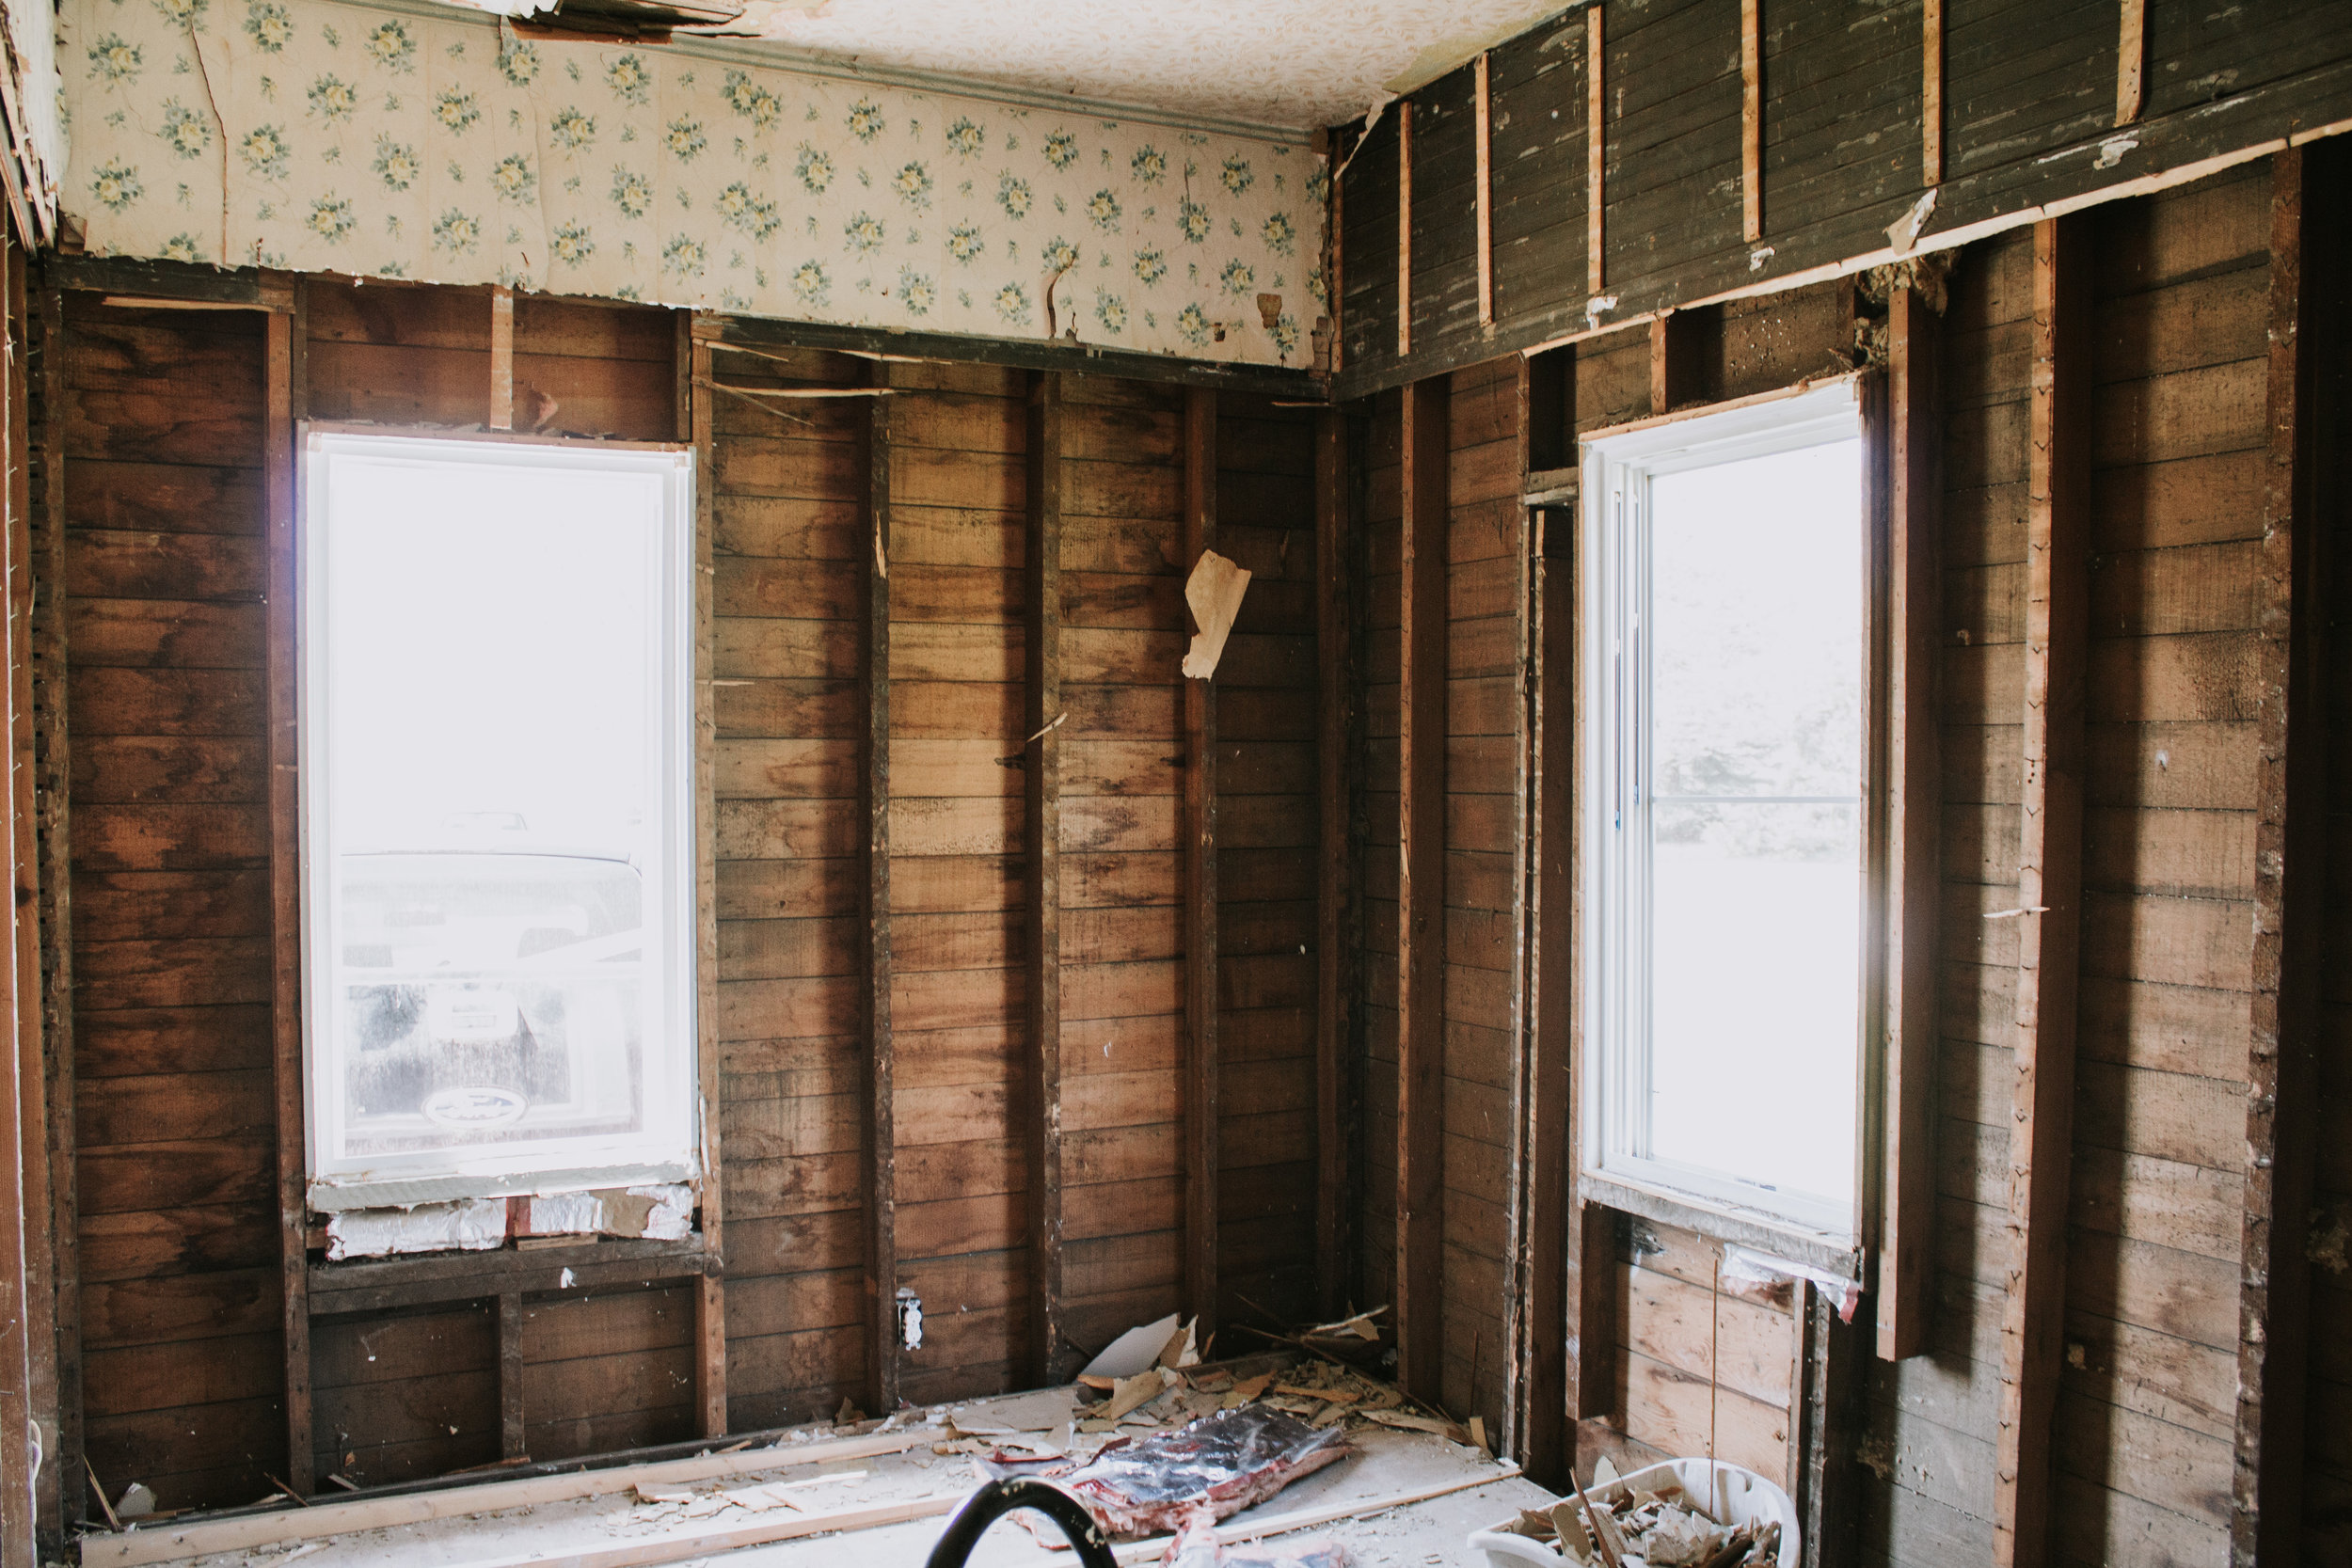 Update on our guest room renovation - the massive remodel has begun